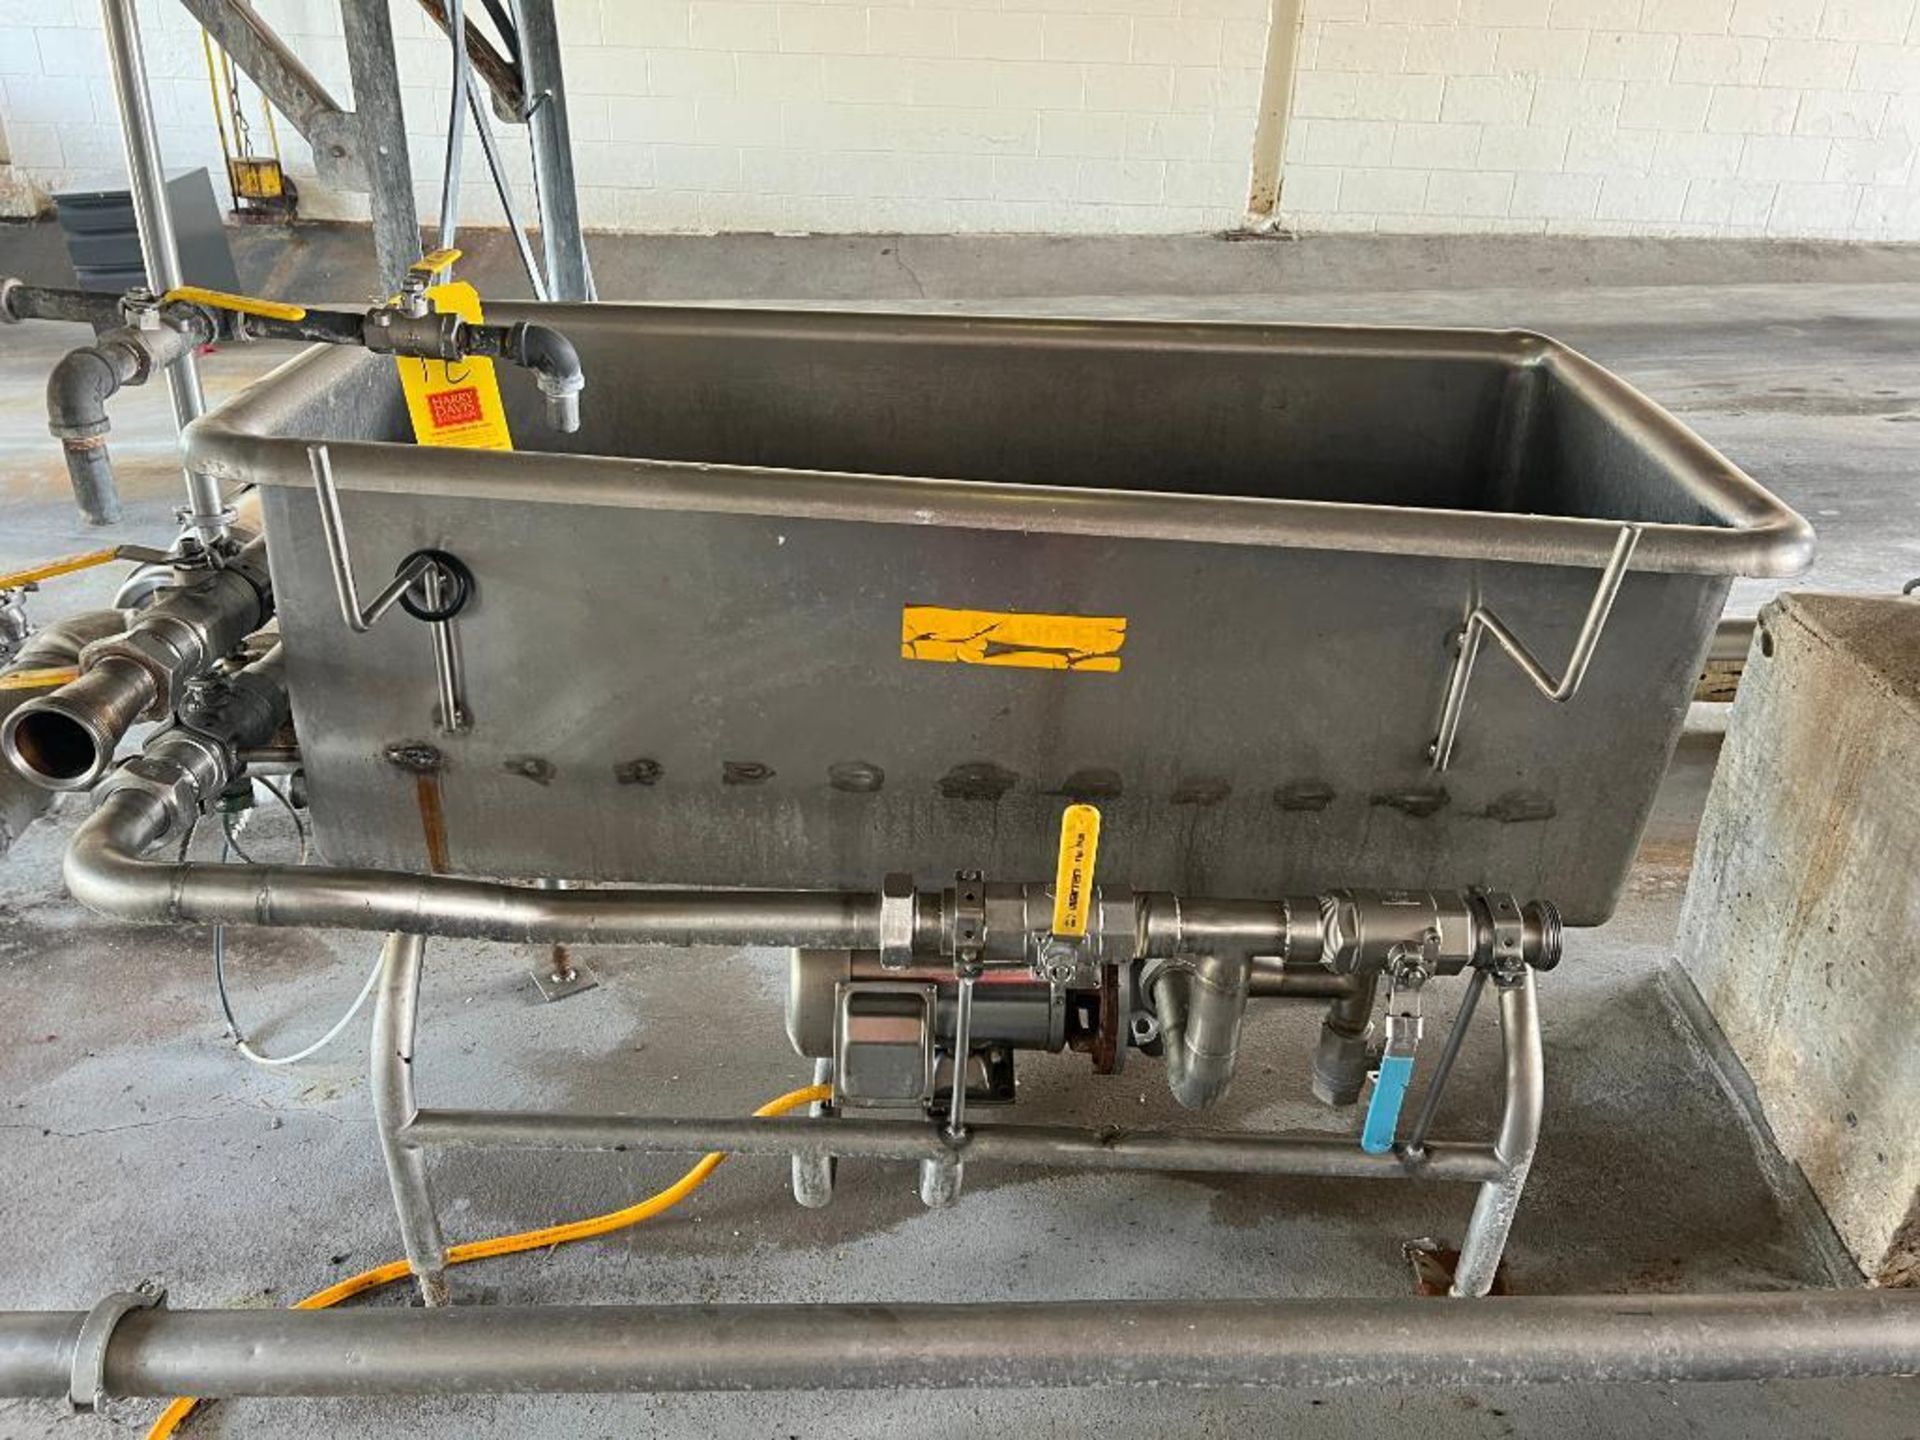 S/S COP Trough with Centrifugal Pump, Dimensions = 54" x 24" - Rigging Fees: $250